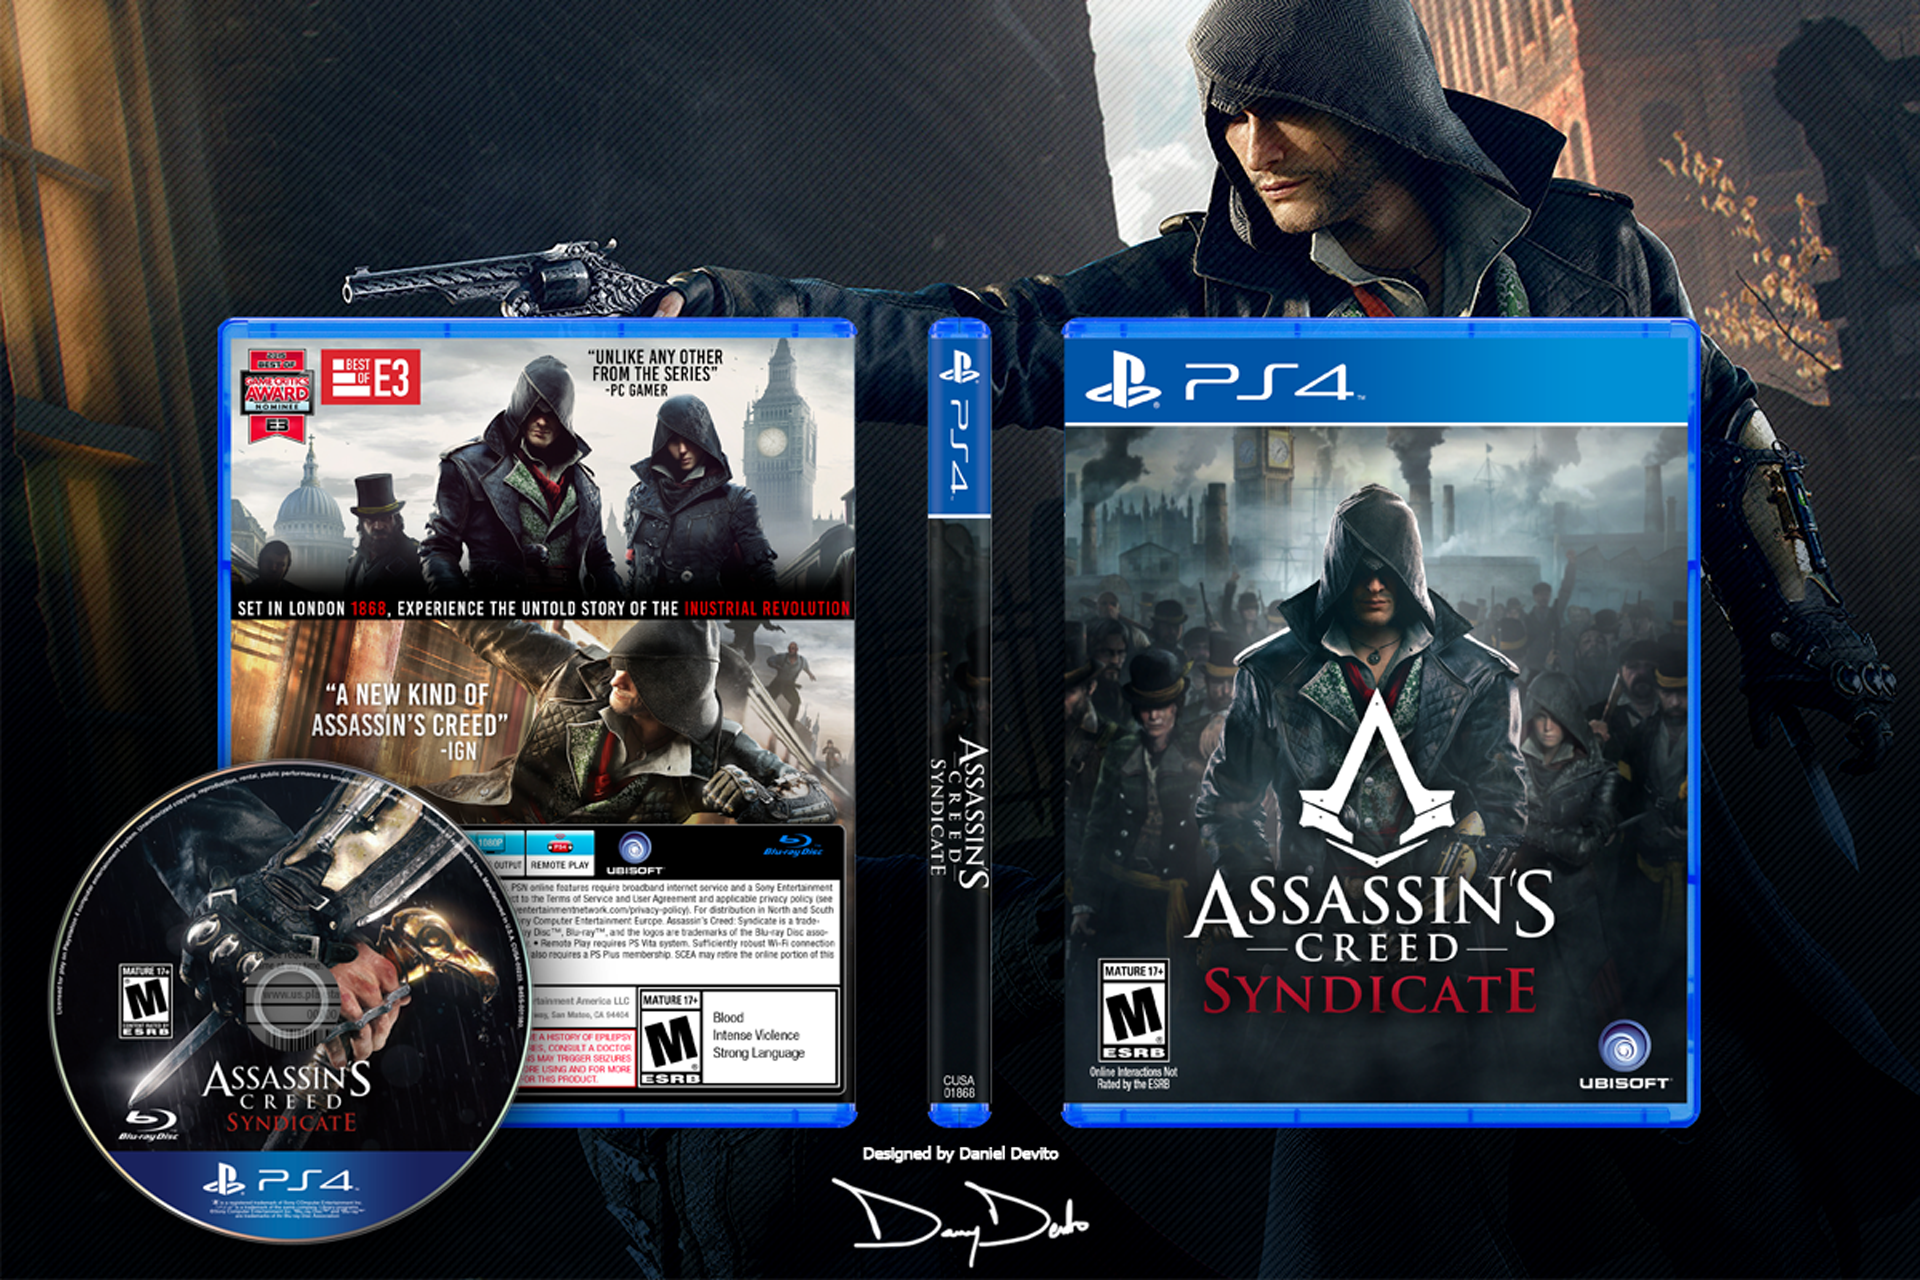 Assassin's Creed Syndicate PS4 box cover